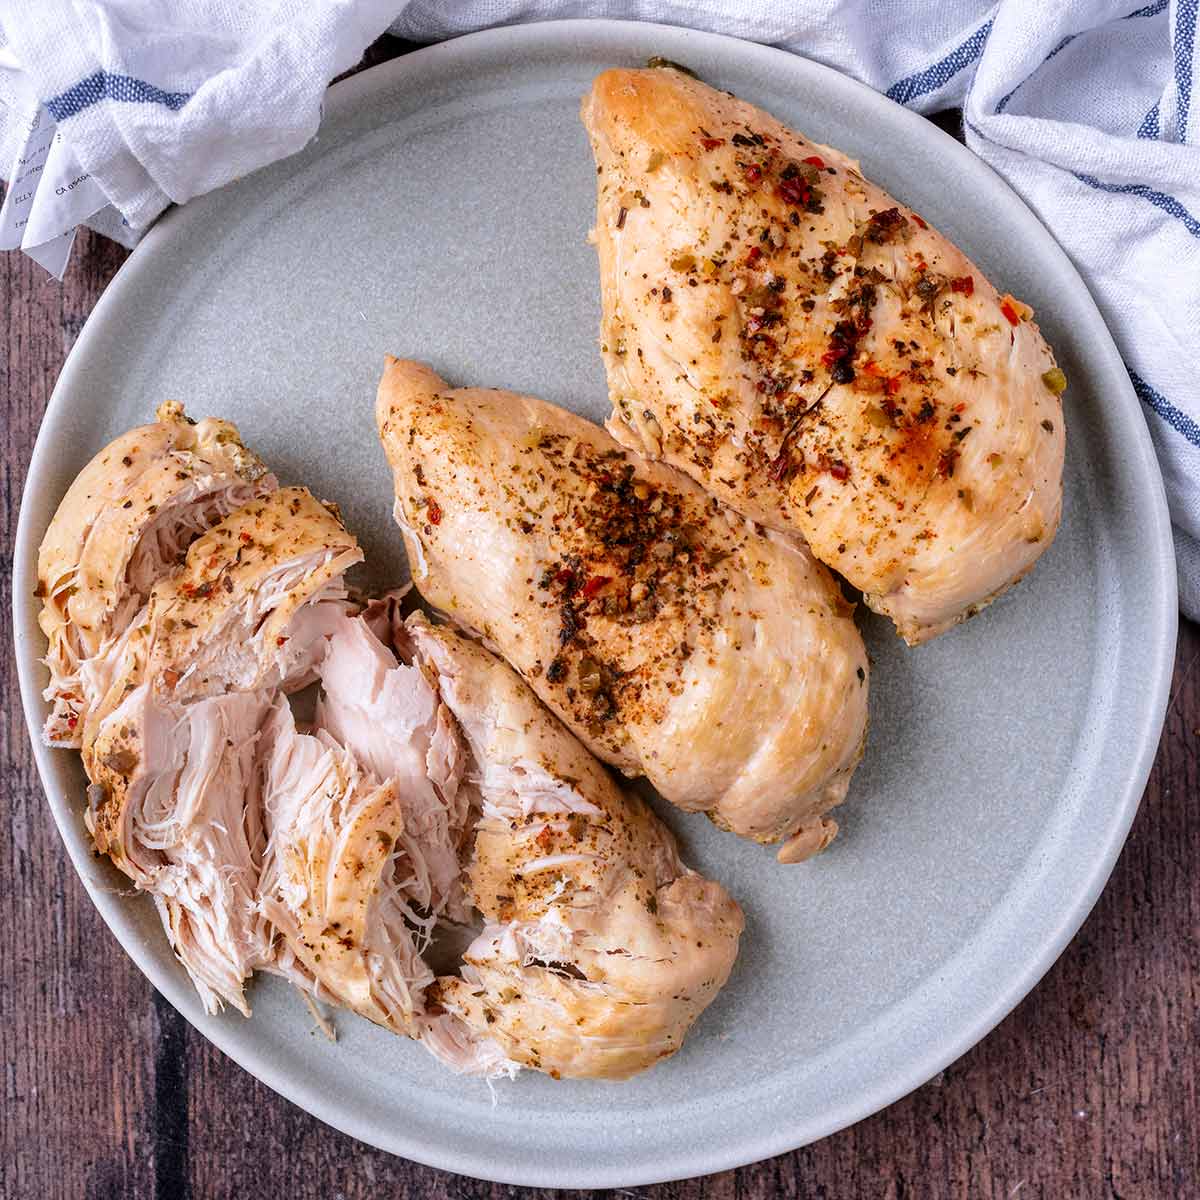 Three slow cooker chicken breasts on a plate, one is sliced.